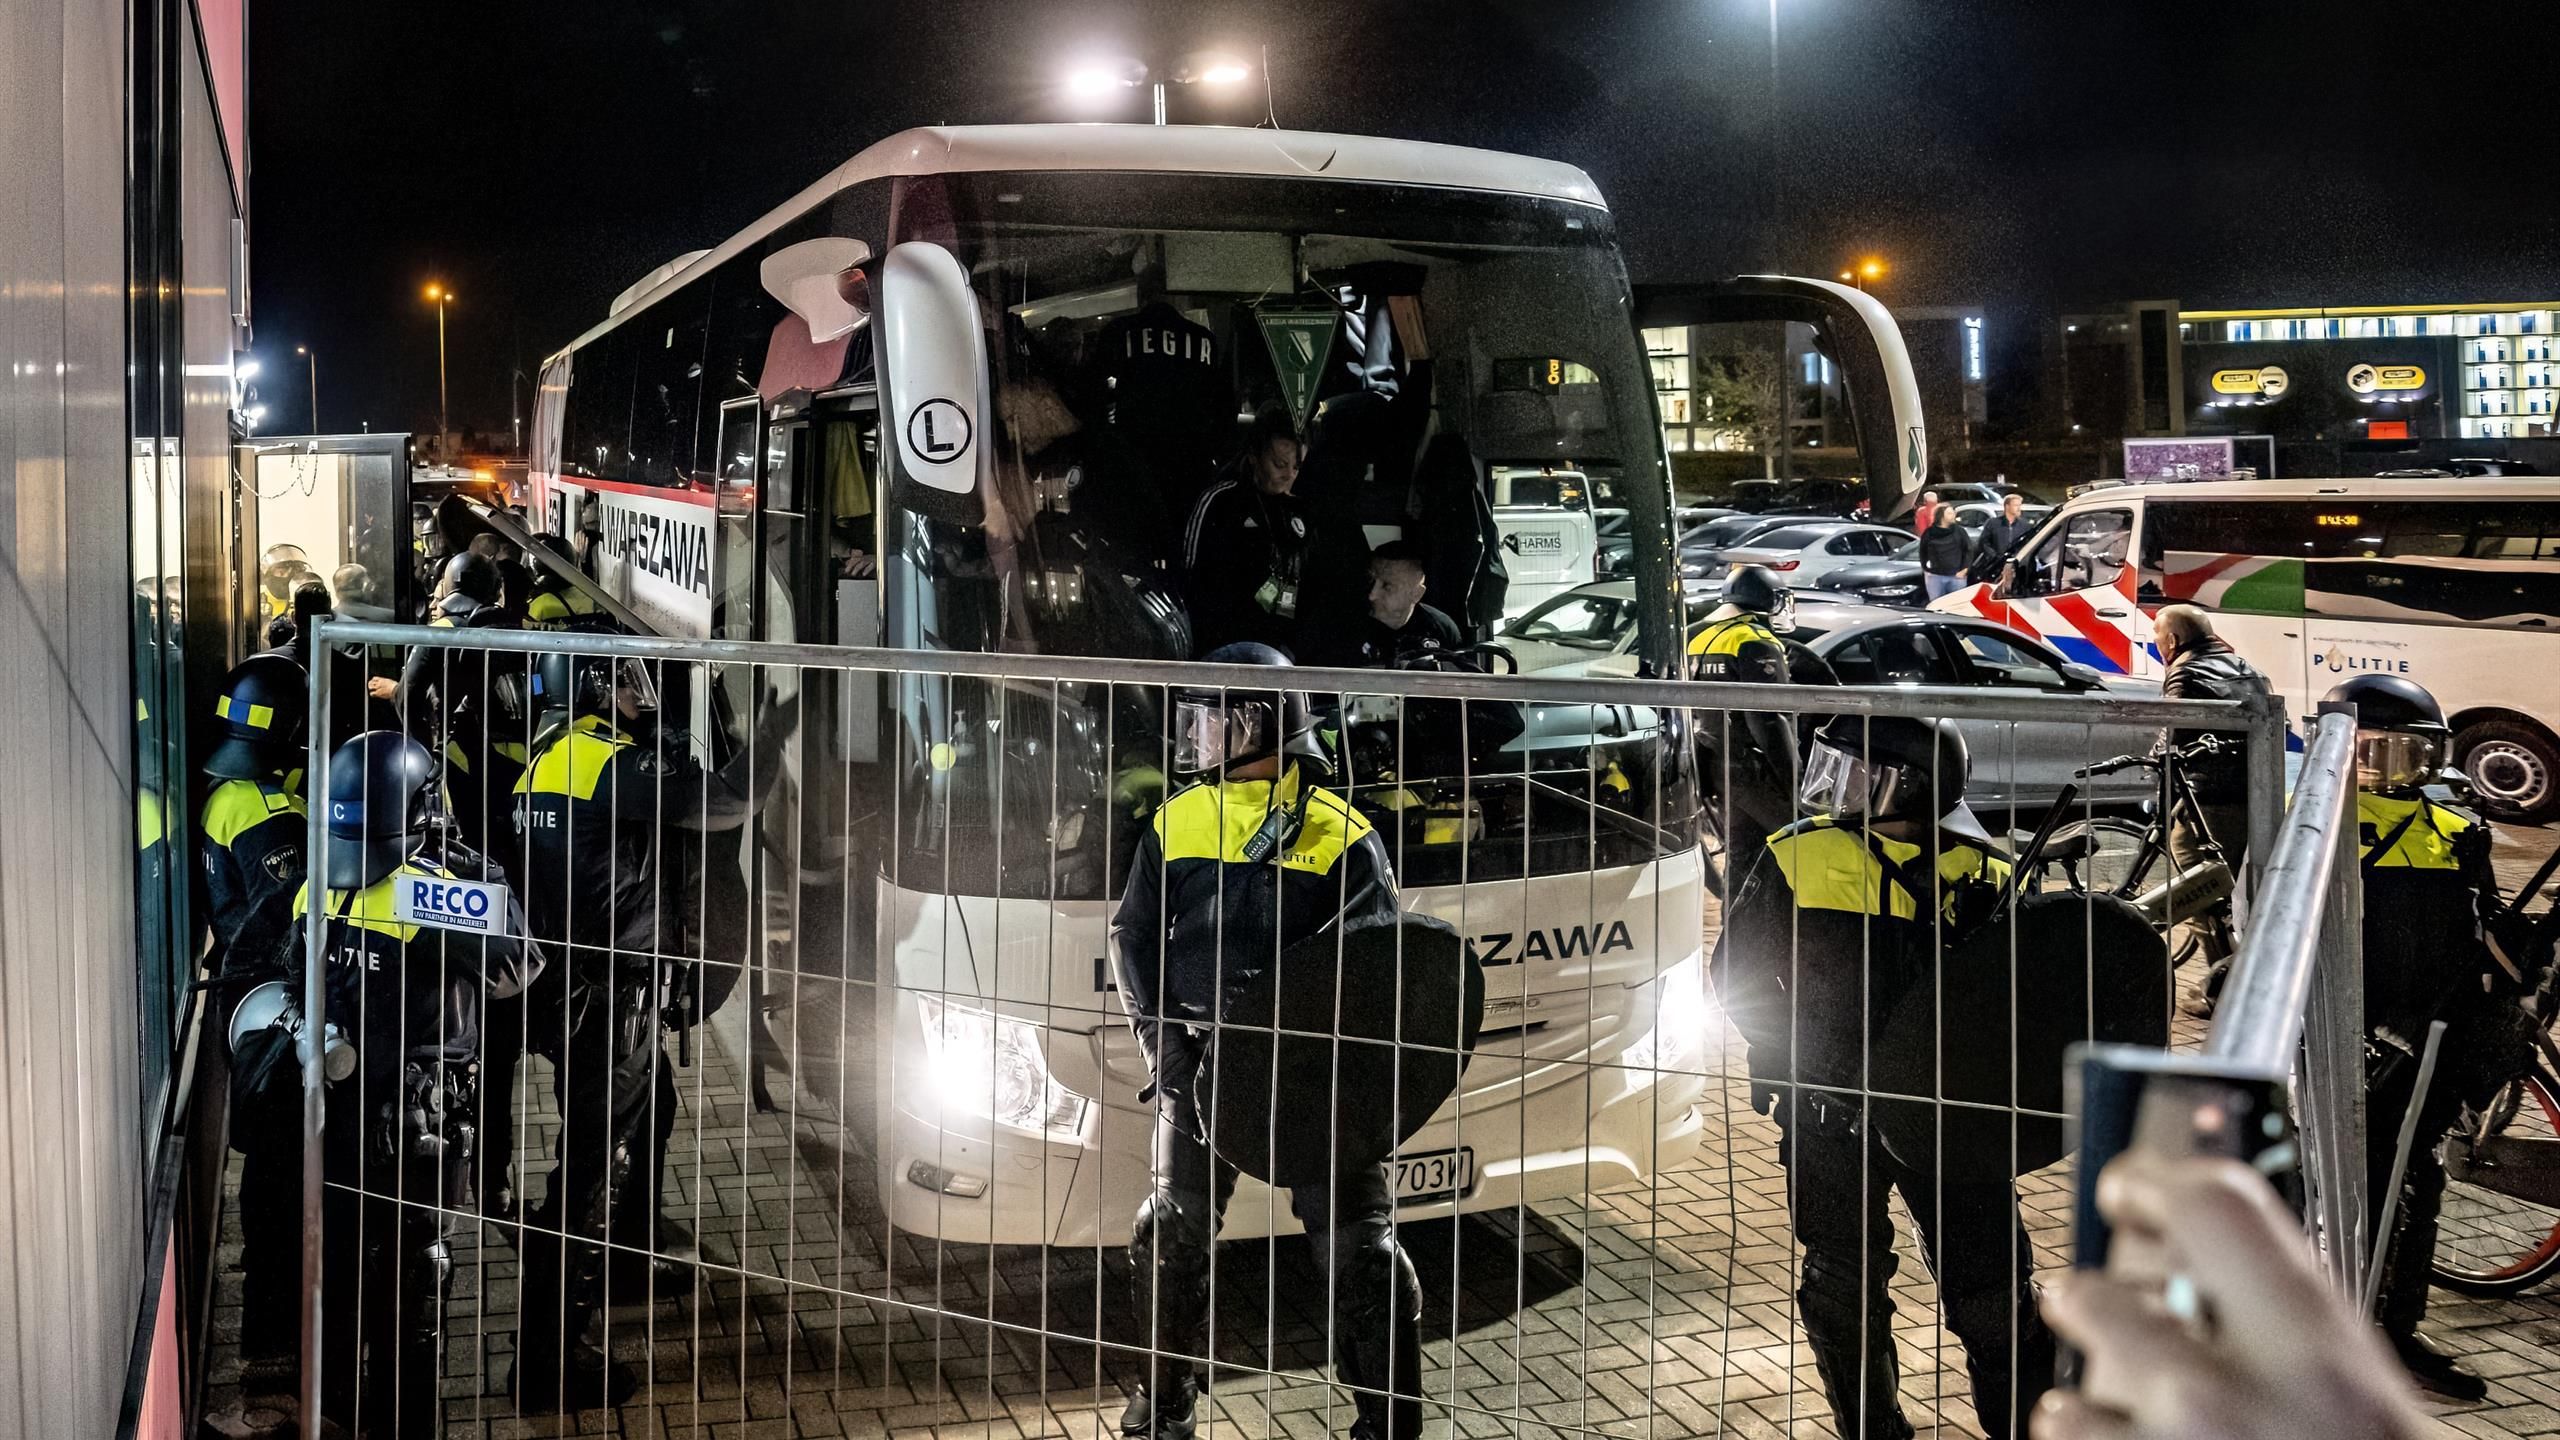 Josue and Radovan Bankov from Legia were arrested by police after the match against AZ Alkmaar